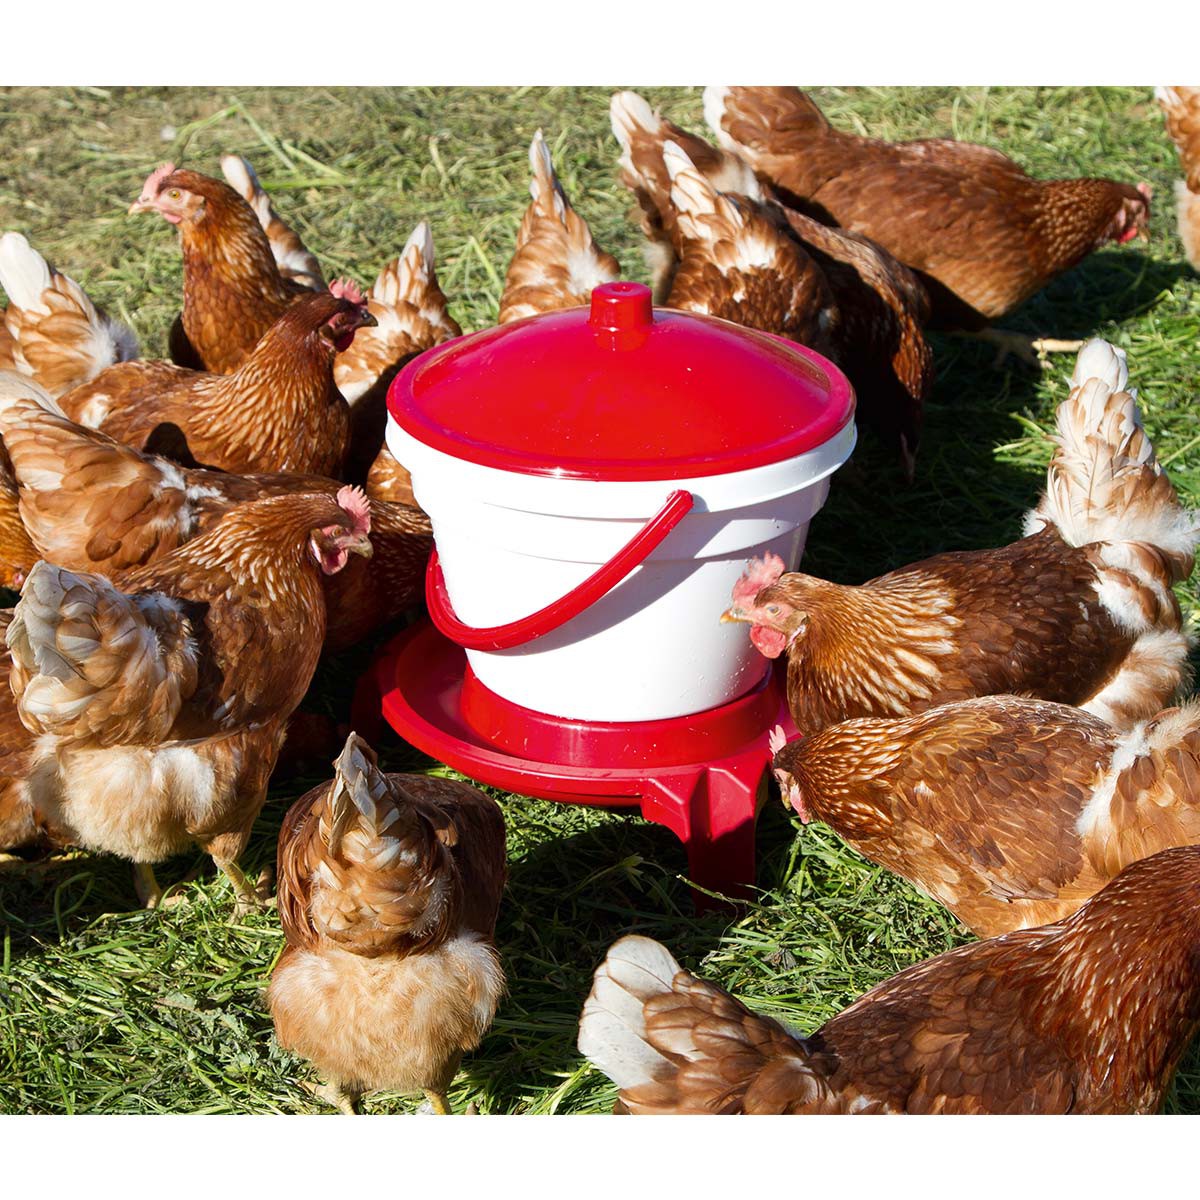 Waterer for poultry